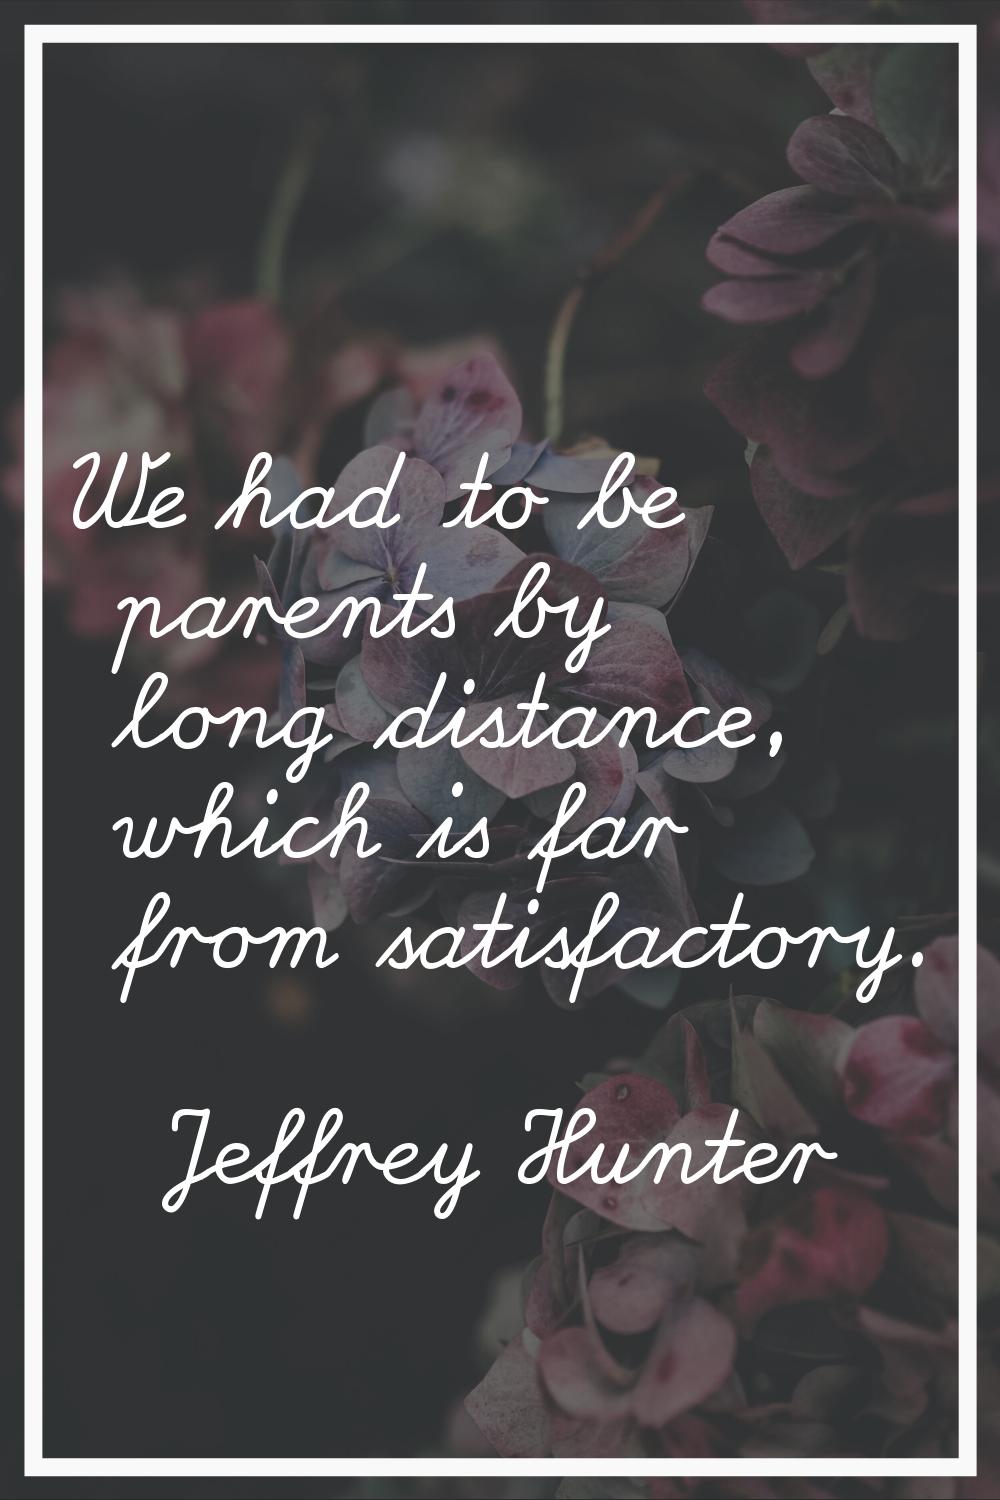 We had to be parents by long distance, which is far from satisfactory.